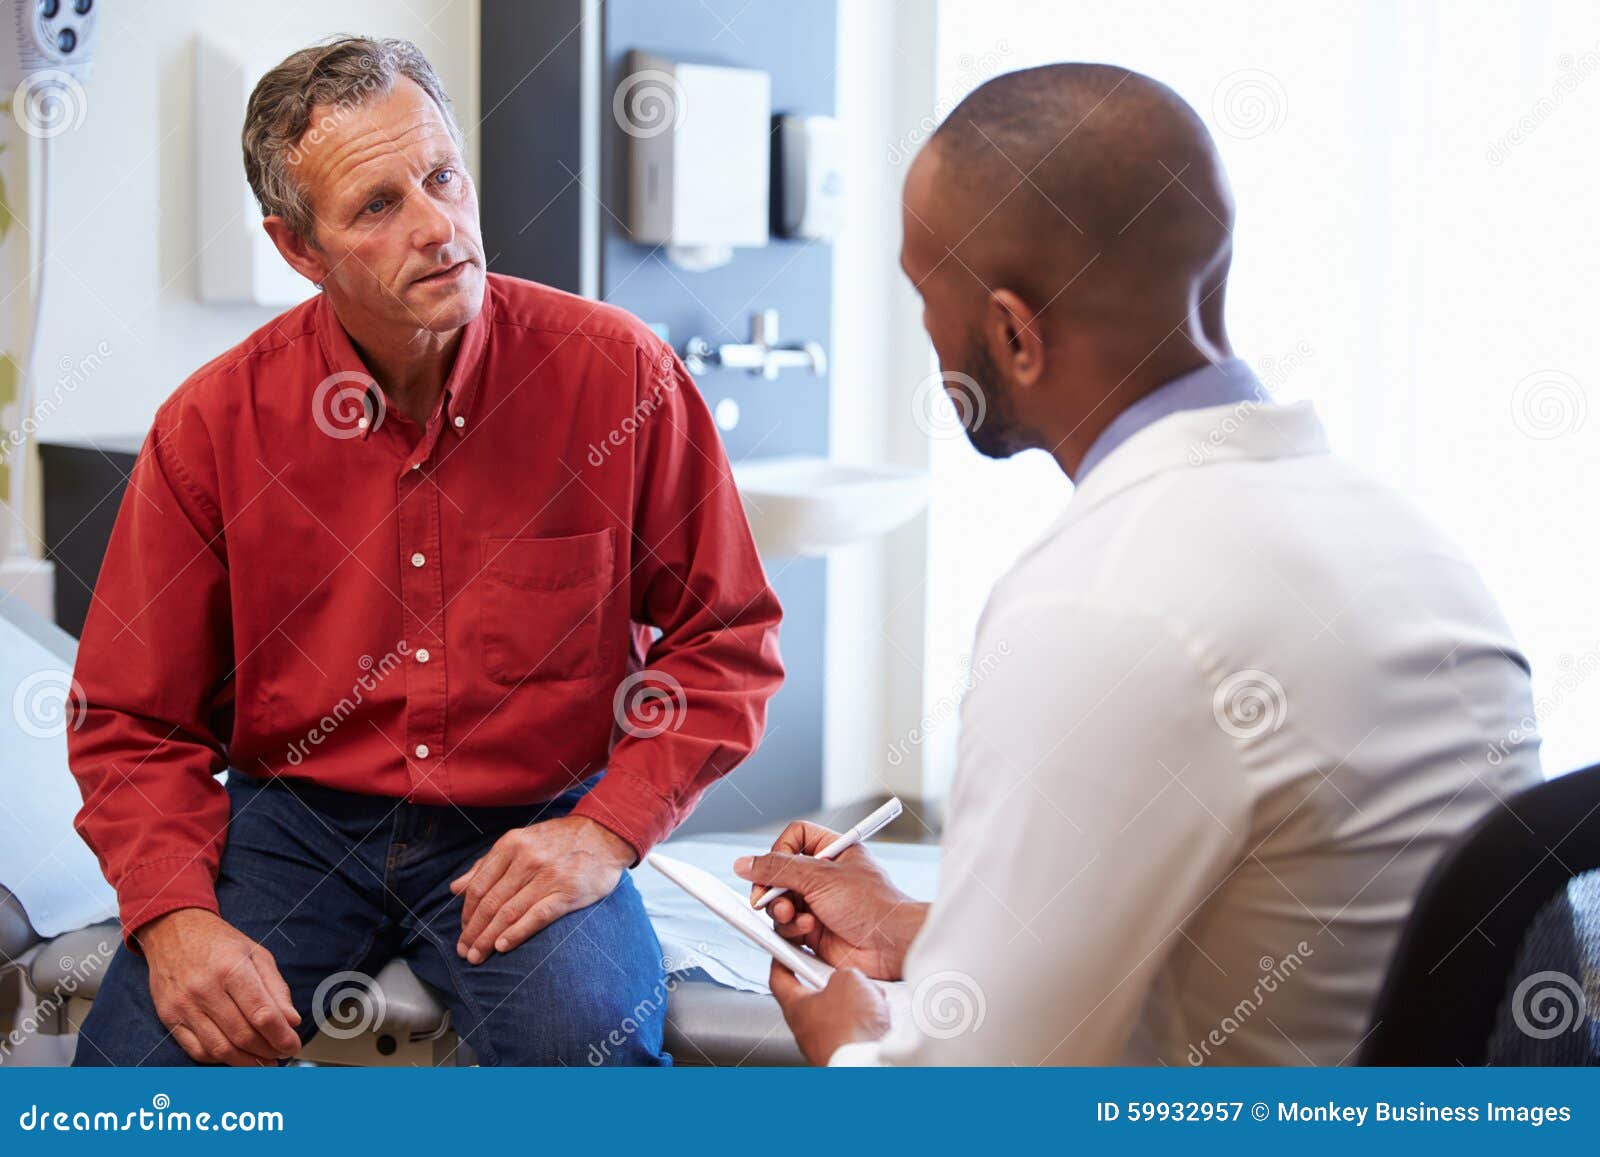 male patient and doctor have consultation in hospital room